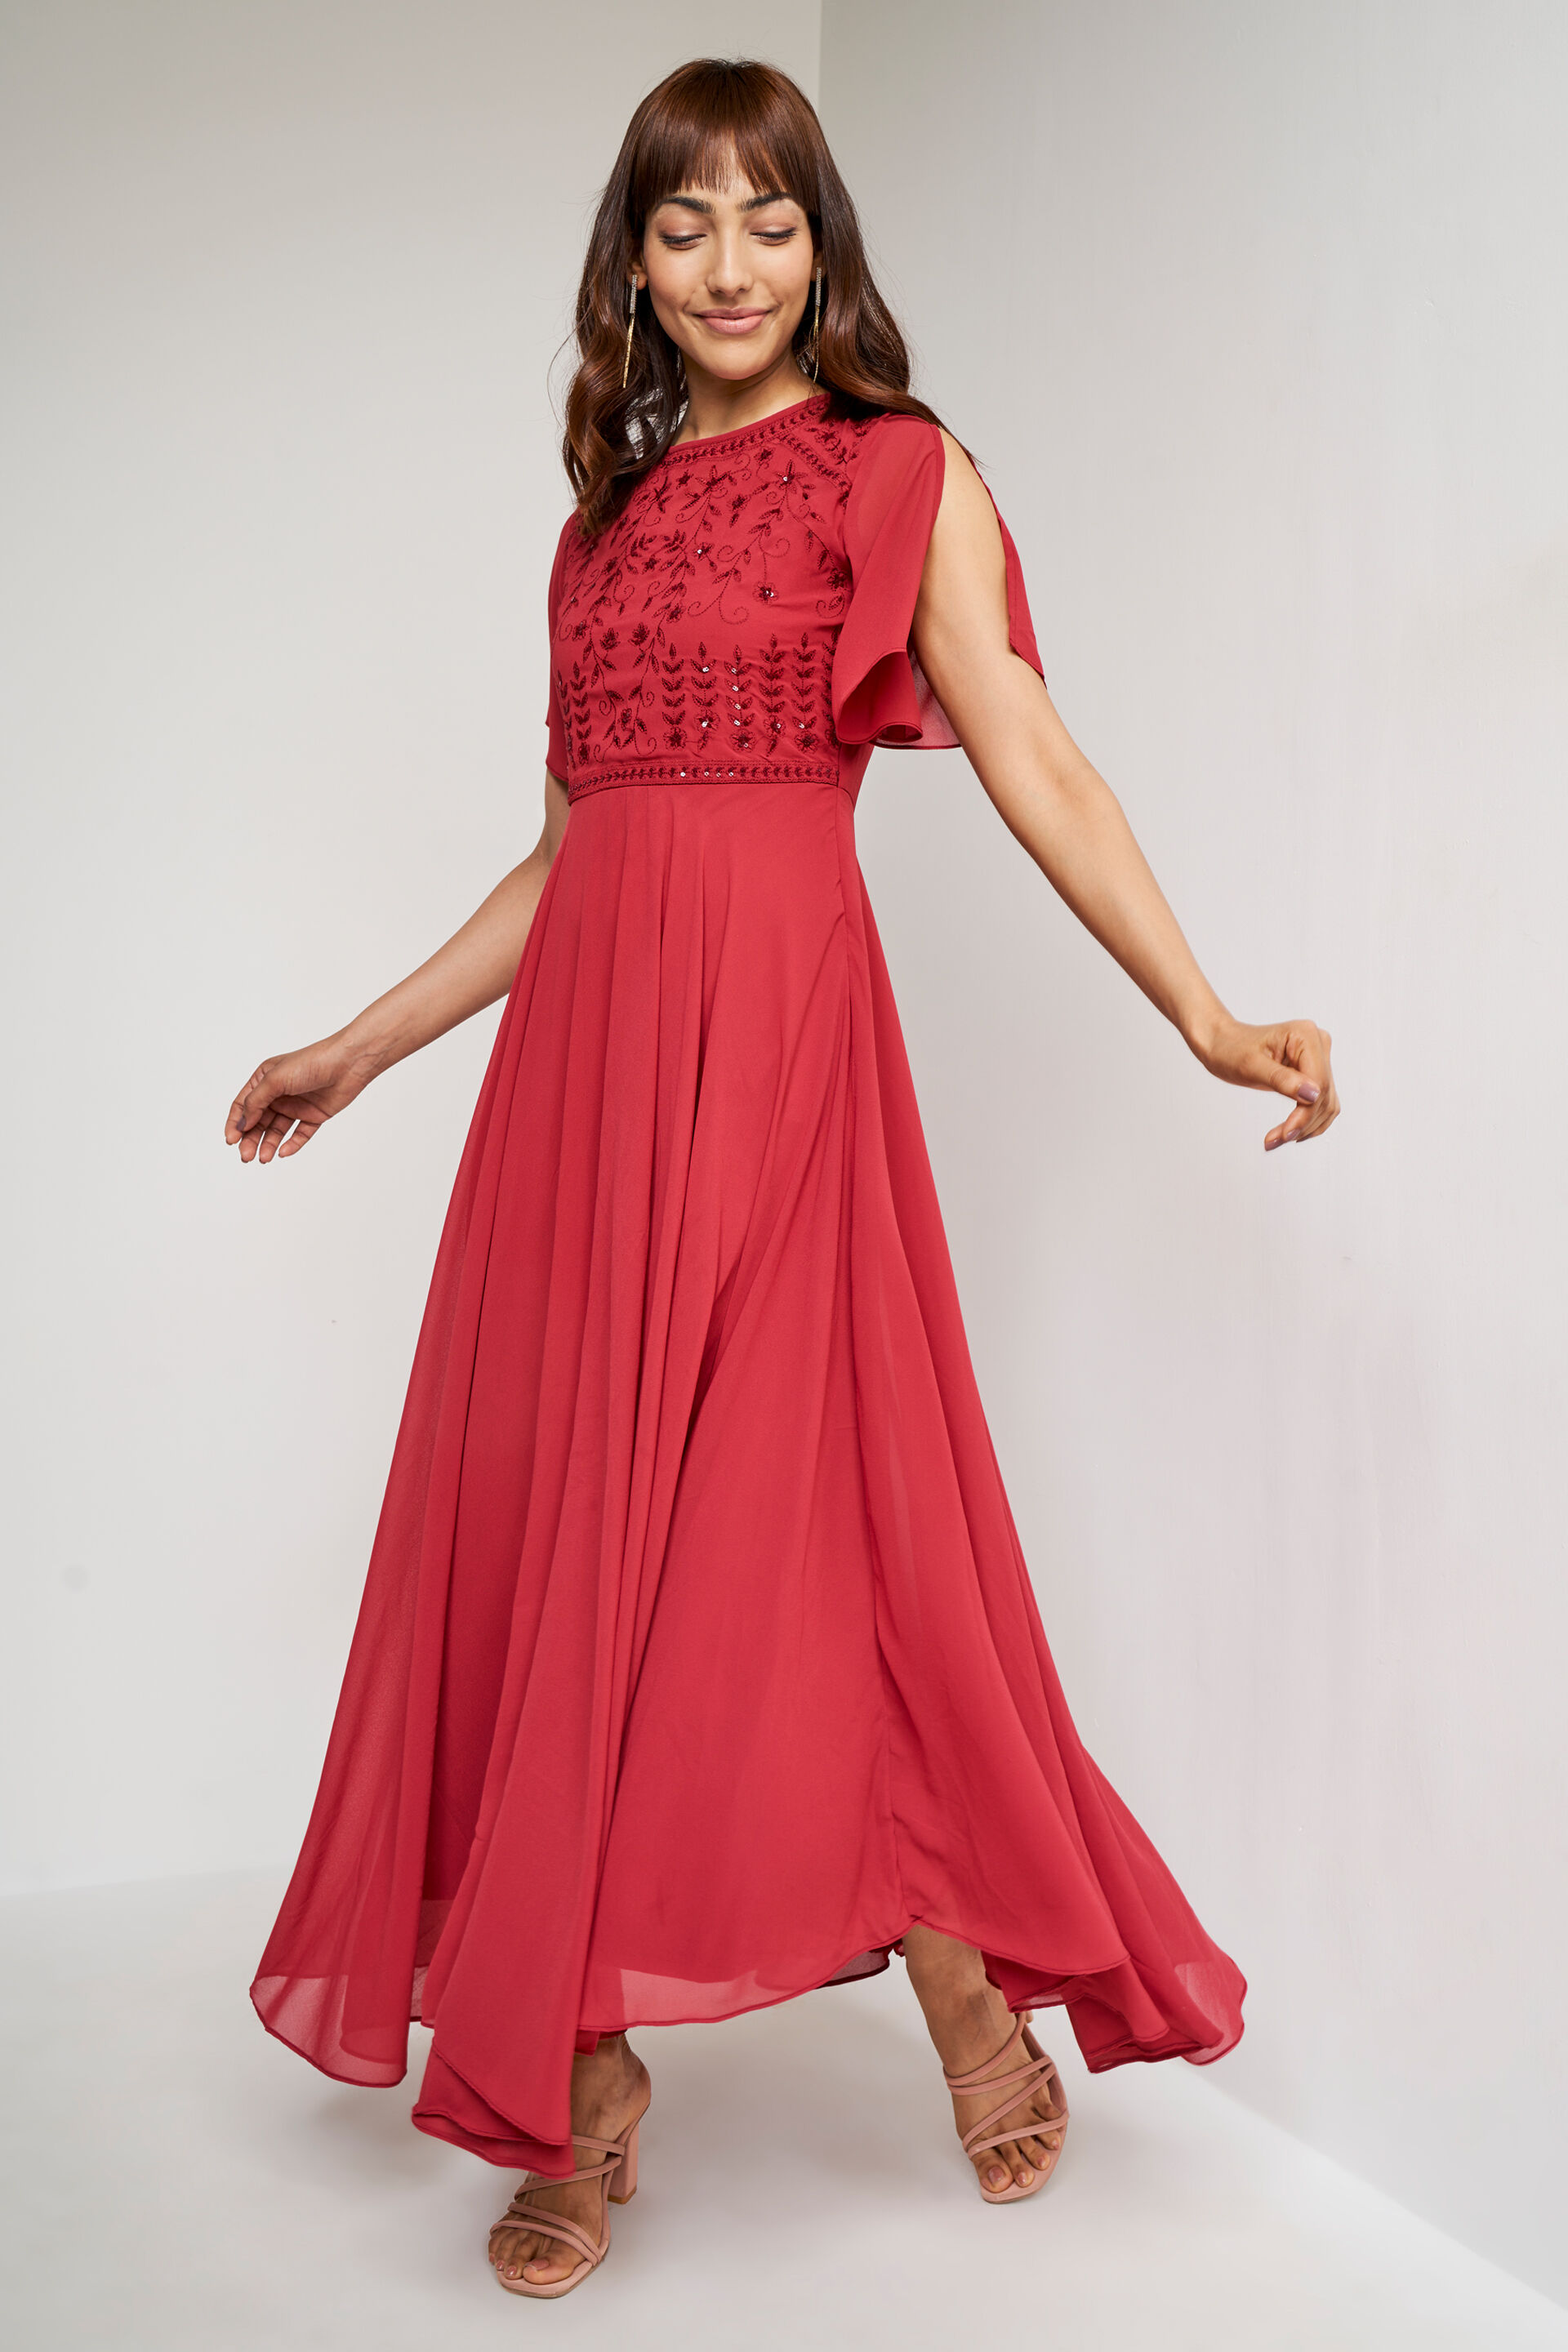 Flared Evening Gown For Indian Ladies - Ethnic Race